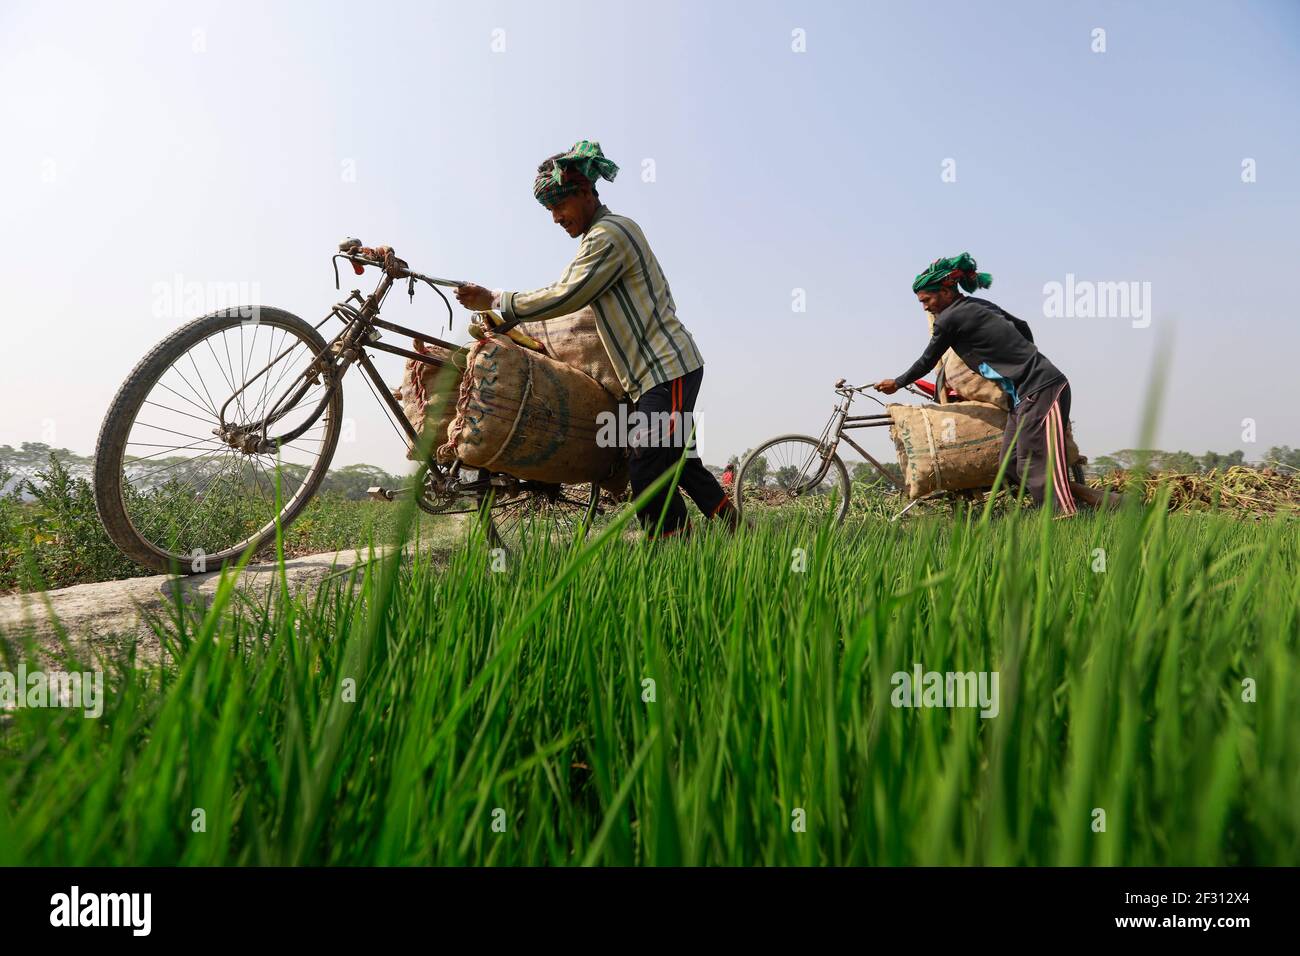 Munshigonj, Bangladesh. 14th Mar, 2021. Bangladeshi farmers carry potato on their bicycles at a village in Munshiganj, near Dhaka, Bangladesh, March 14, 2021. As the winter season draws to an end, the farmers get busy harvesting potatoes from the fields. Following a bumper production of potatoes this year, the farmers are now waiting to get a fair price for their harvests. Credit: Suvra Kanti Das/ZUMA Wire/Alamy Live News Stock Photo